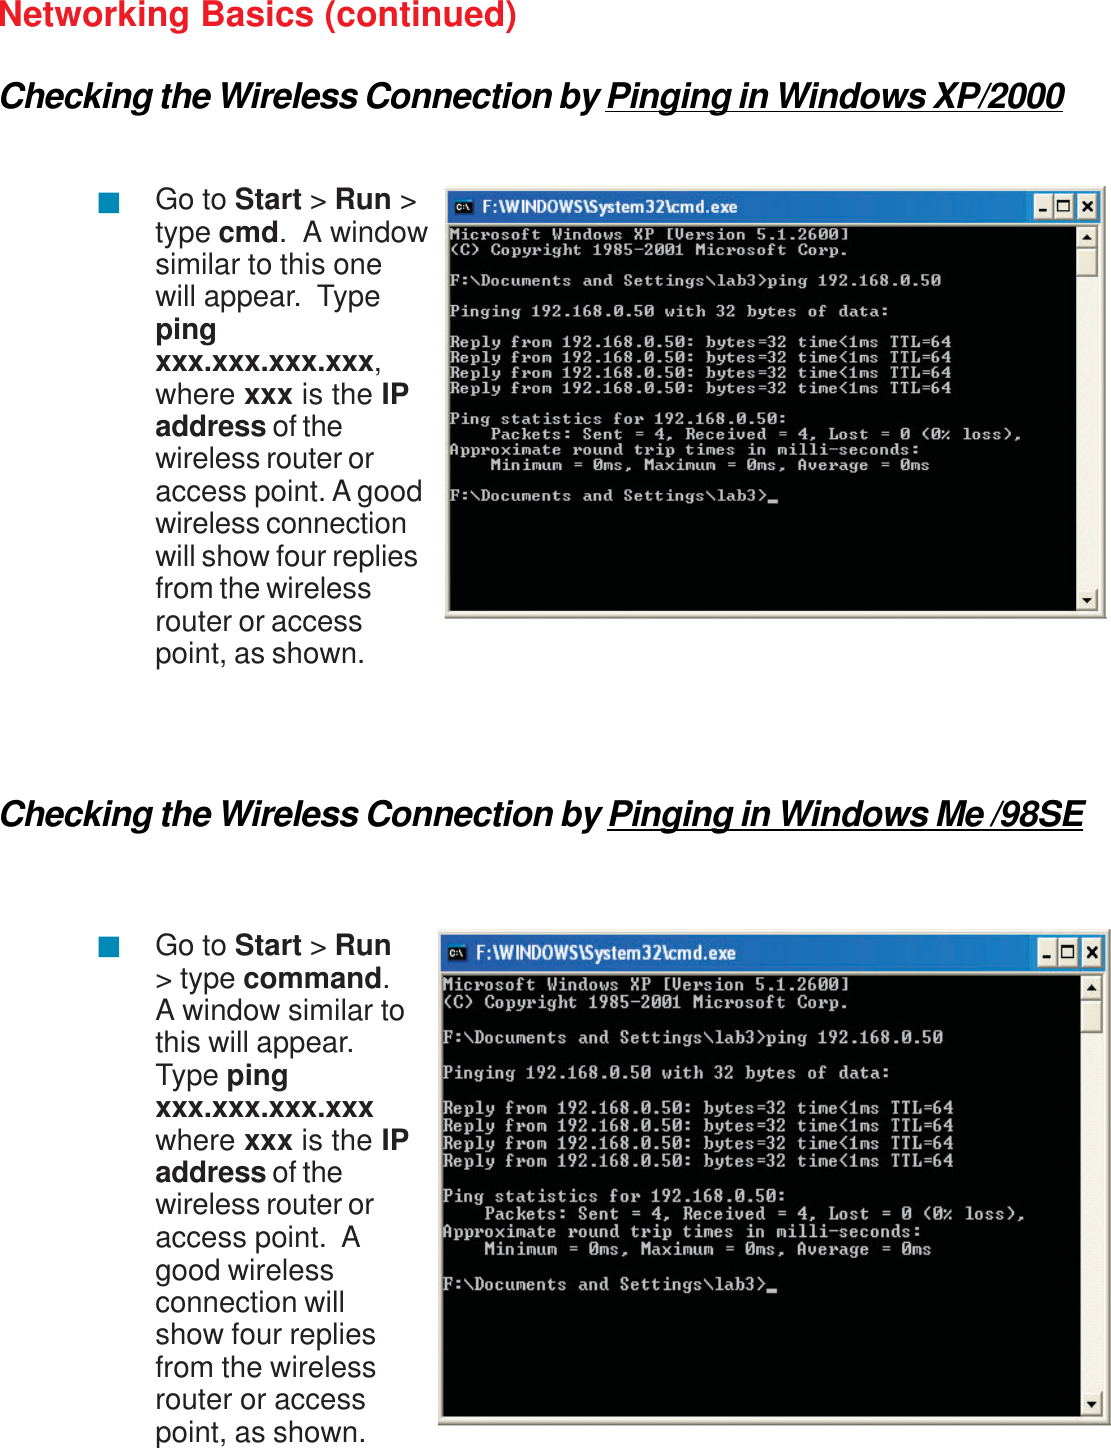 31Networking Basics (continued)Checking the Wireless Connection by Pinging in Windows XP/2000Checking the Wireless Connection by Pinging in Windows Me /98SEGo to Start &gt; Run &gt;type cmd.  A windowsimilar to this onewill appear.  Typepingxxx.xxx.xxx.xxx,where xxx is the IPaddress of thewireless router oraccess point. A goodwireless connectionwill show four repliesfrom the wirelessrouter or accesspoint, as shown.Go to Start &gt;Run&gt; type command.A window similar tothis will appear.Type pingxxx.xxx.xxx.xxxwhere xxx is the IPaddress of thewireless router oraccess point.  Agood wirelessconnection willshow four repliesfrom the wirelessrouter or accesspoint, as shown.